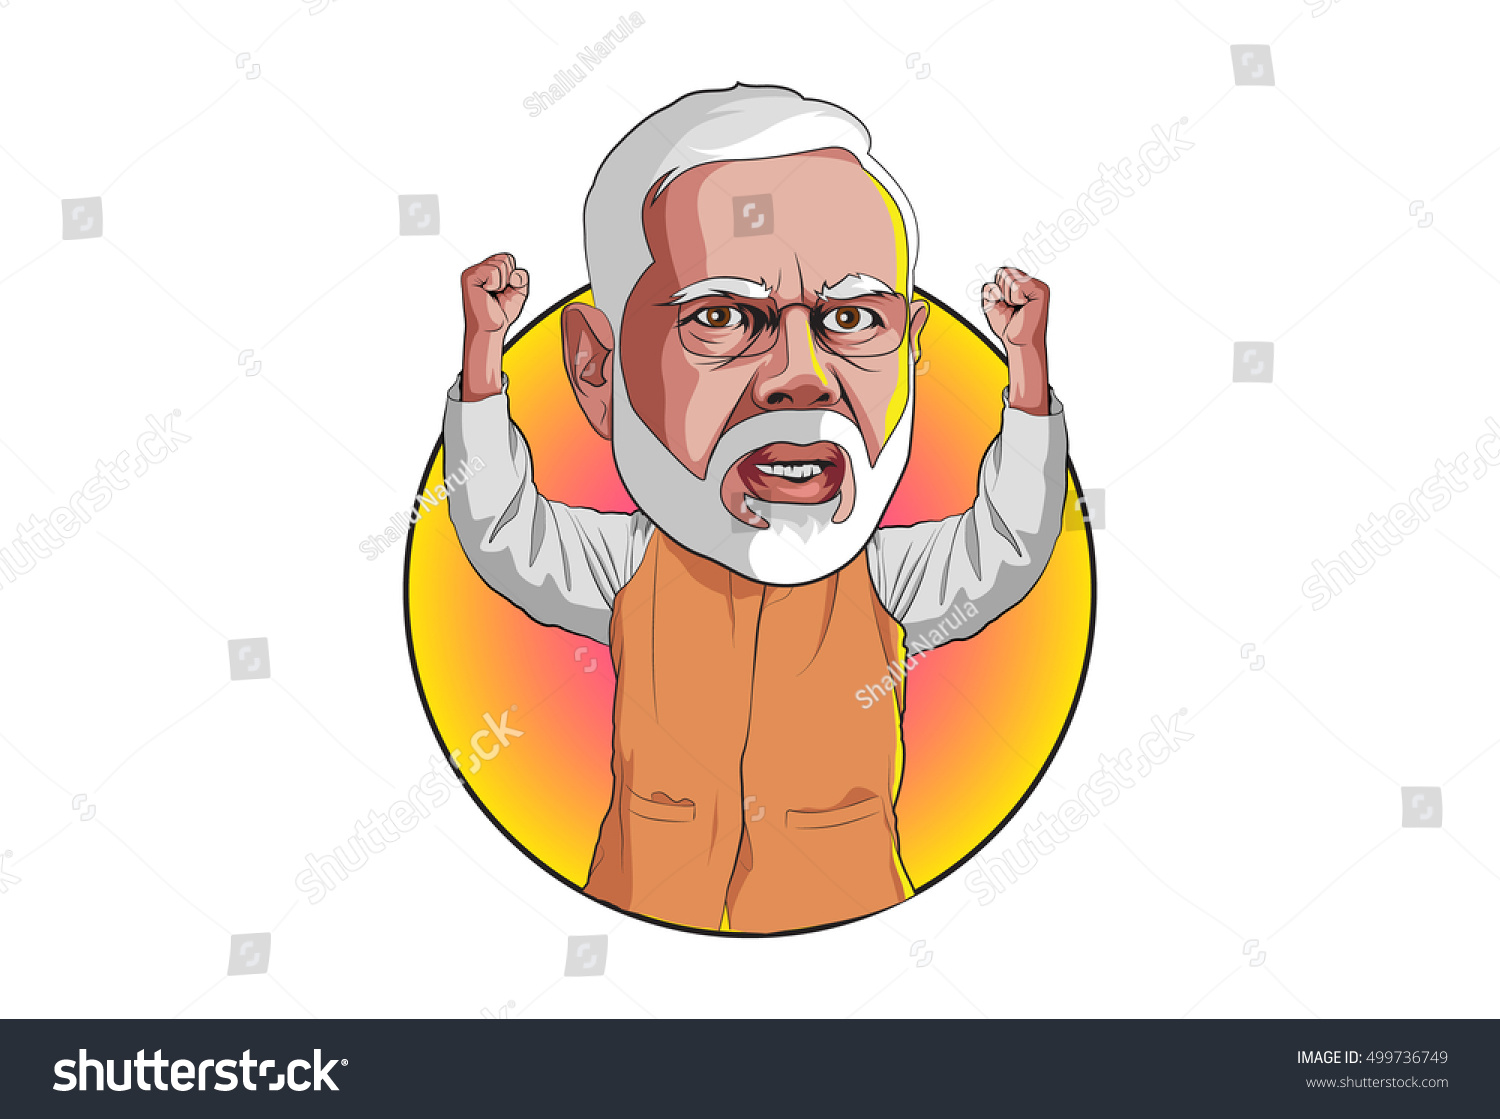 Oct 17, 2016 Caricature character illustration of Narendra Modi - Prime  Minister of India.